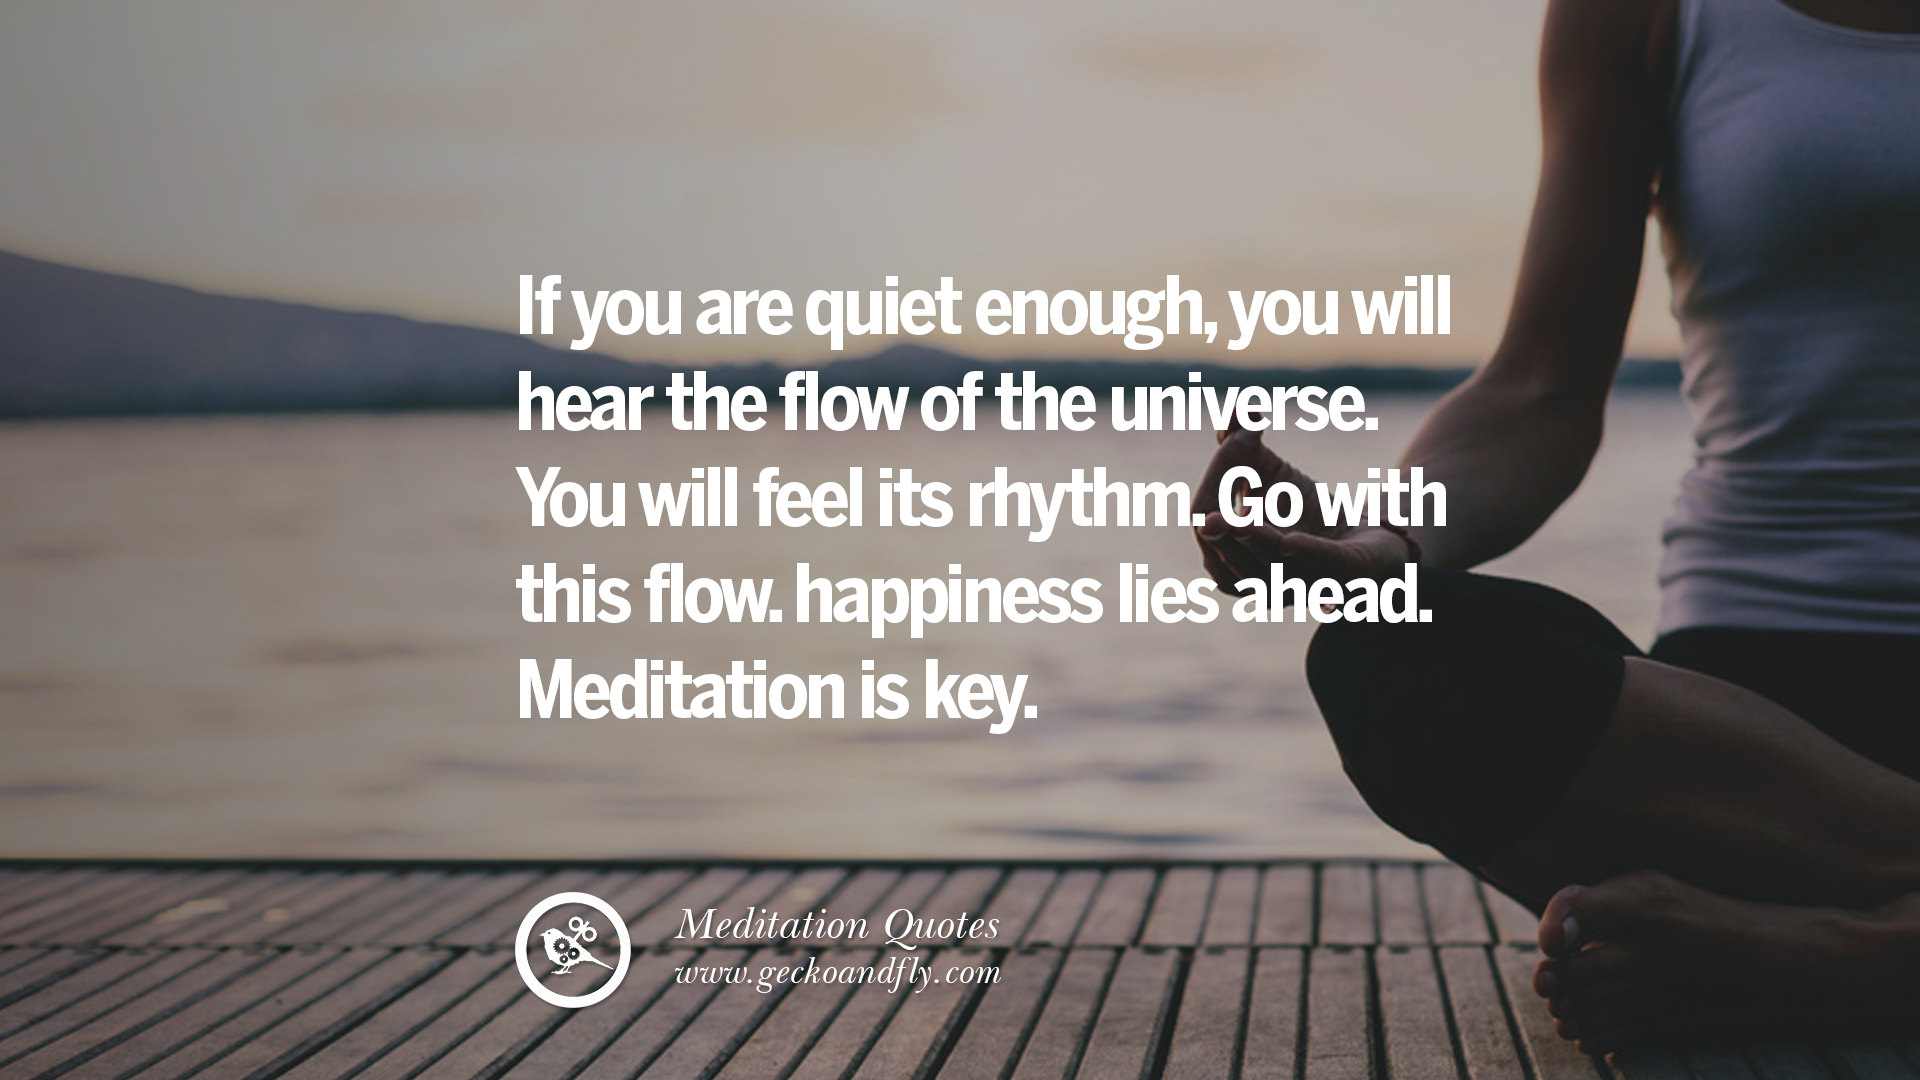 36 Famous Quotes on Mindfulness Meditation For Yoga, Sleeping, and Healing